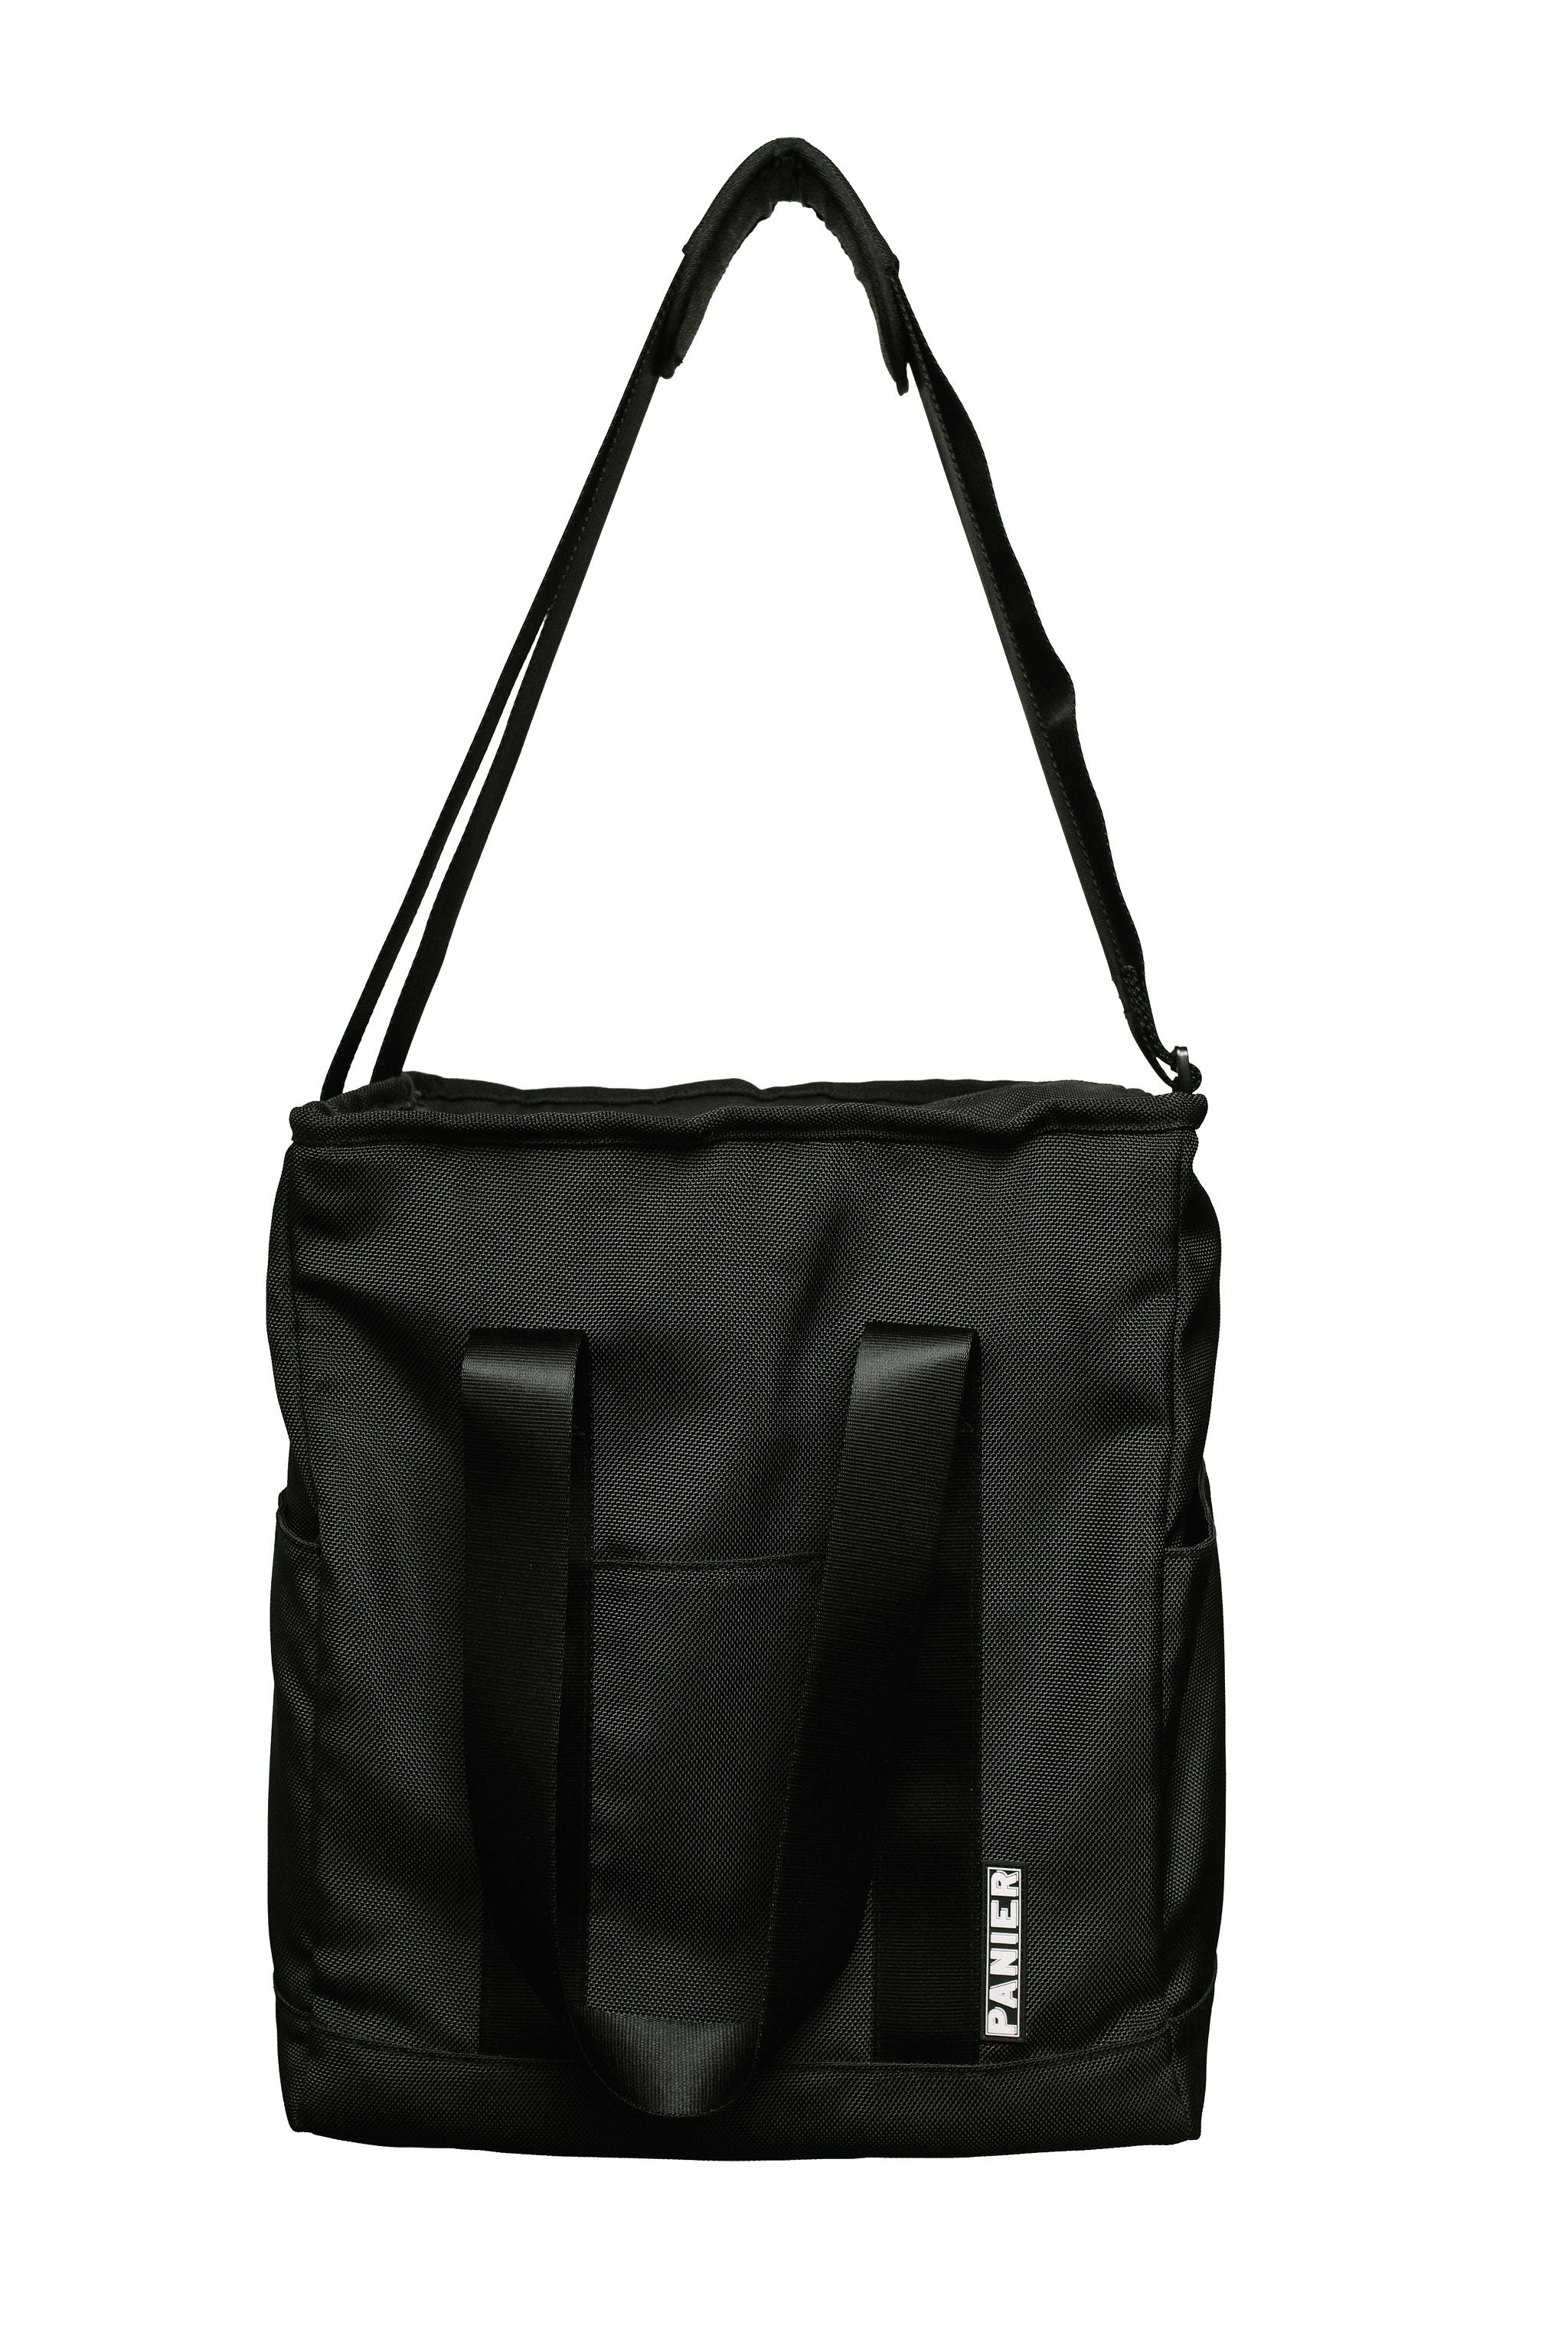 TIMO- 6 Bottle Tote